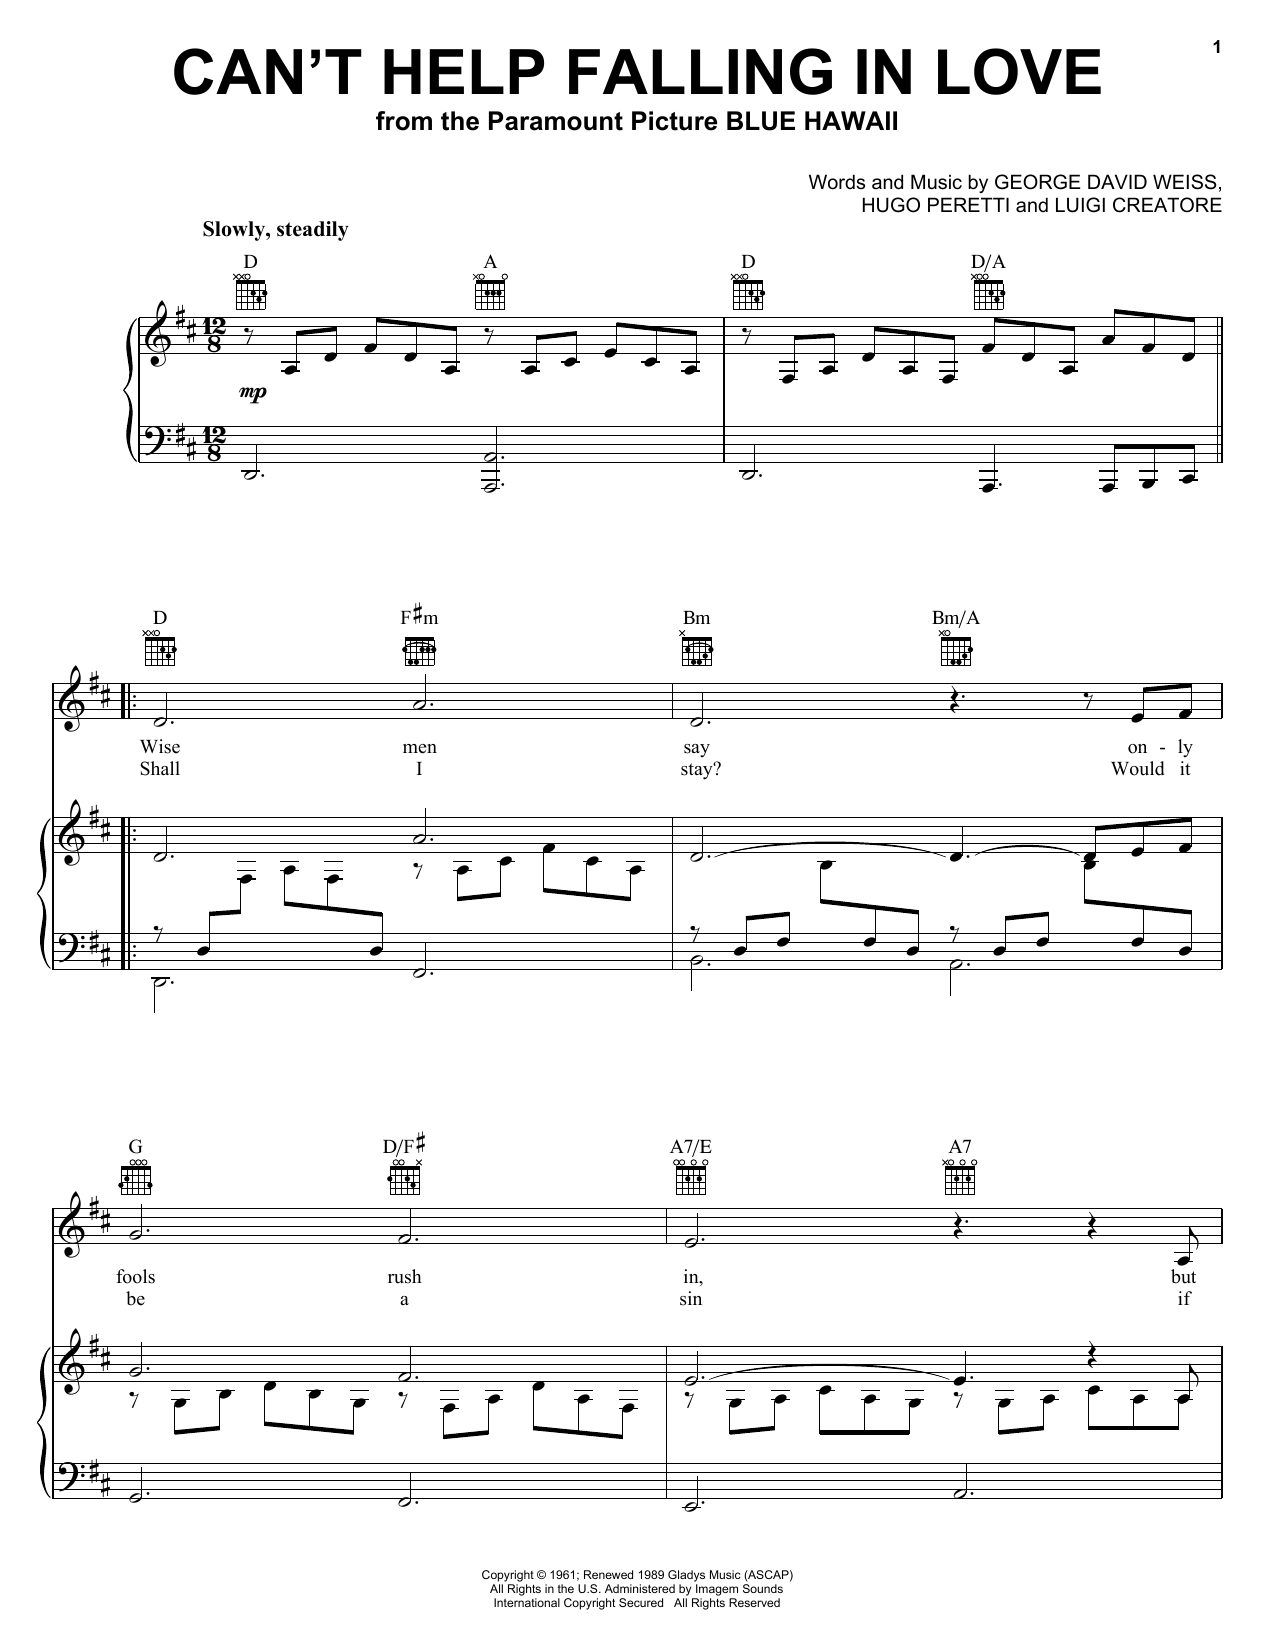 Elvis Presley Can't Help Falling In Love sheet music notes and chords. Download Printable PDF.